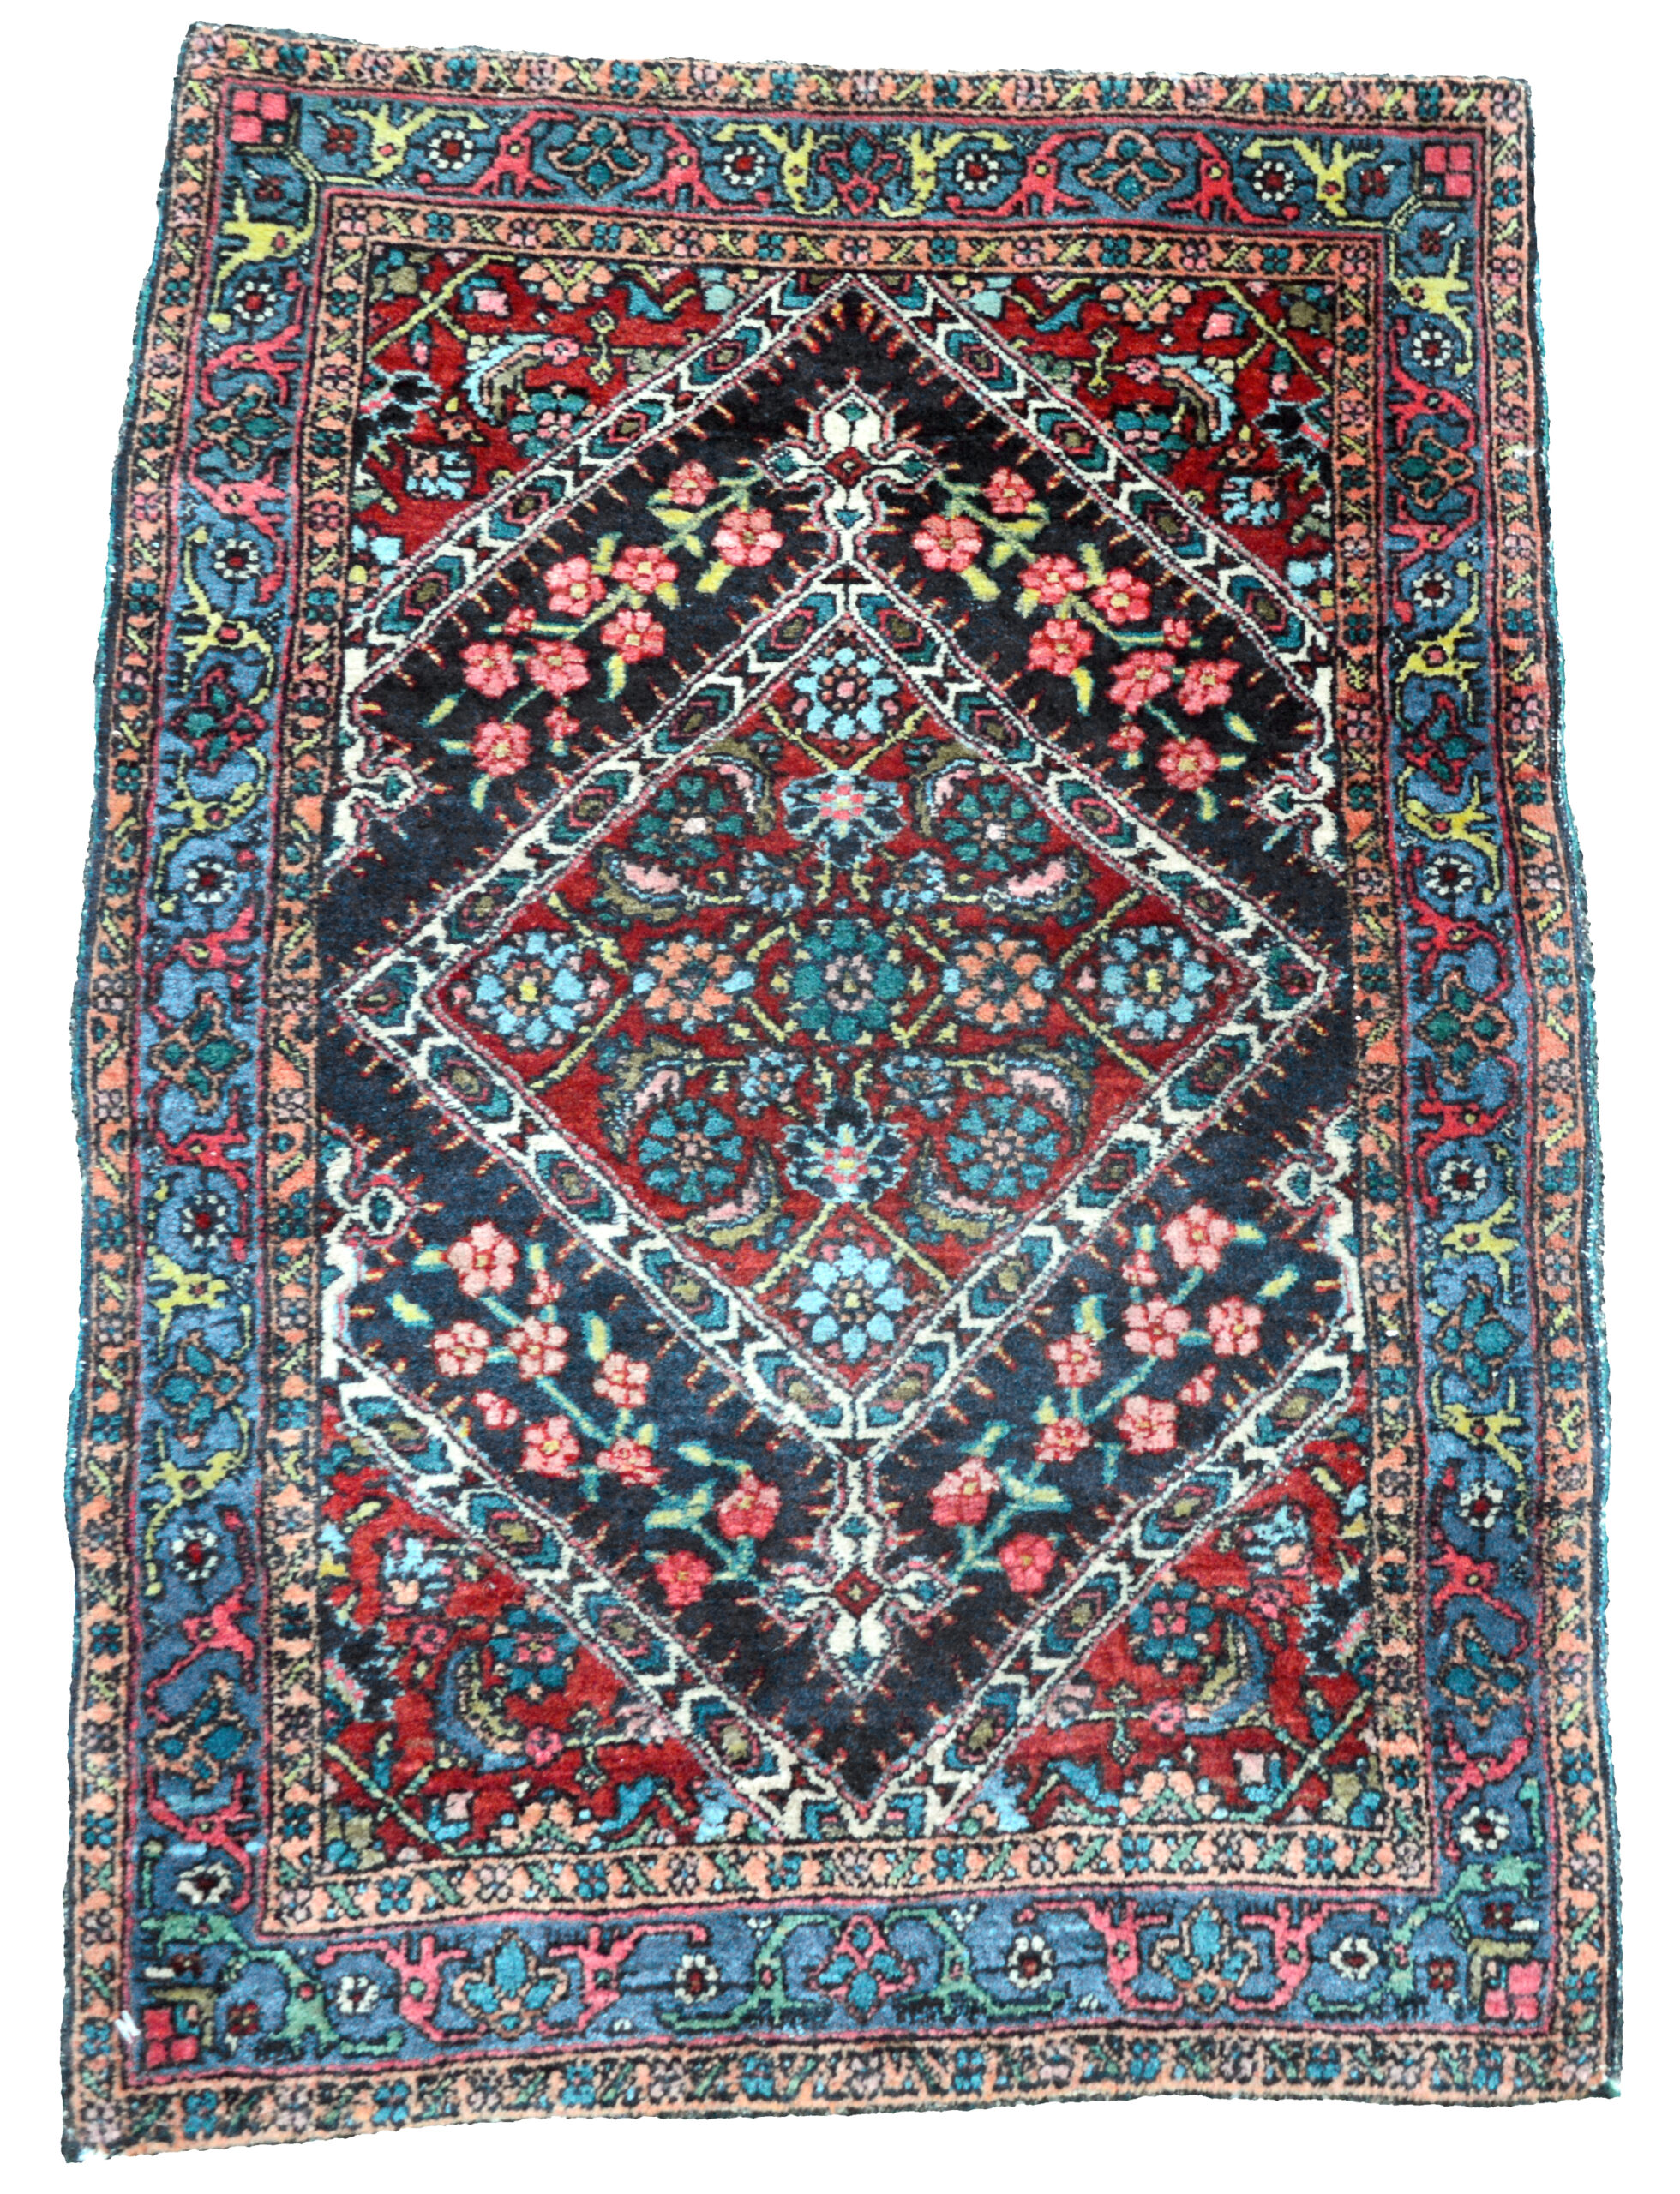 Antique Persian Bidjar rug with a red medallion on a navy blue field that is framed by a deep sky blue border, northwest Persia, circa 1915 - Douglas Stock Gallery, antique Oriental rugs, South Natick, Wellesley, Newton, Brookline MA area